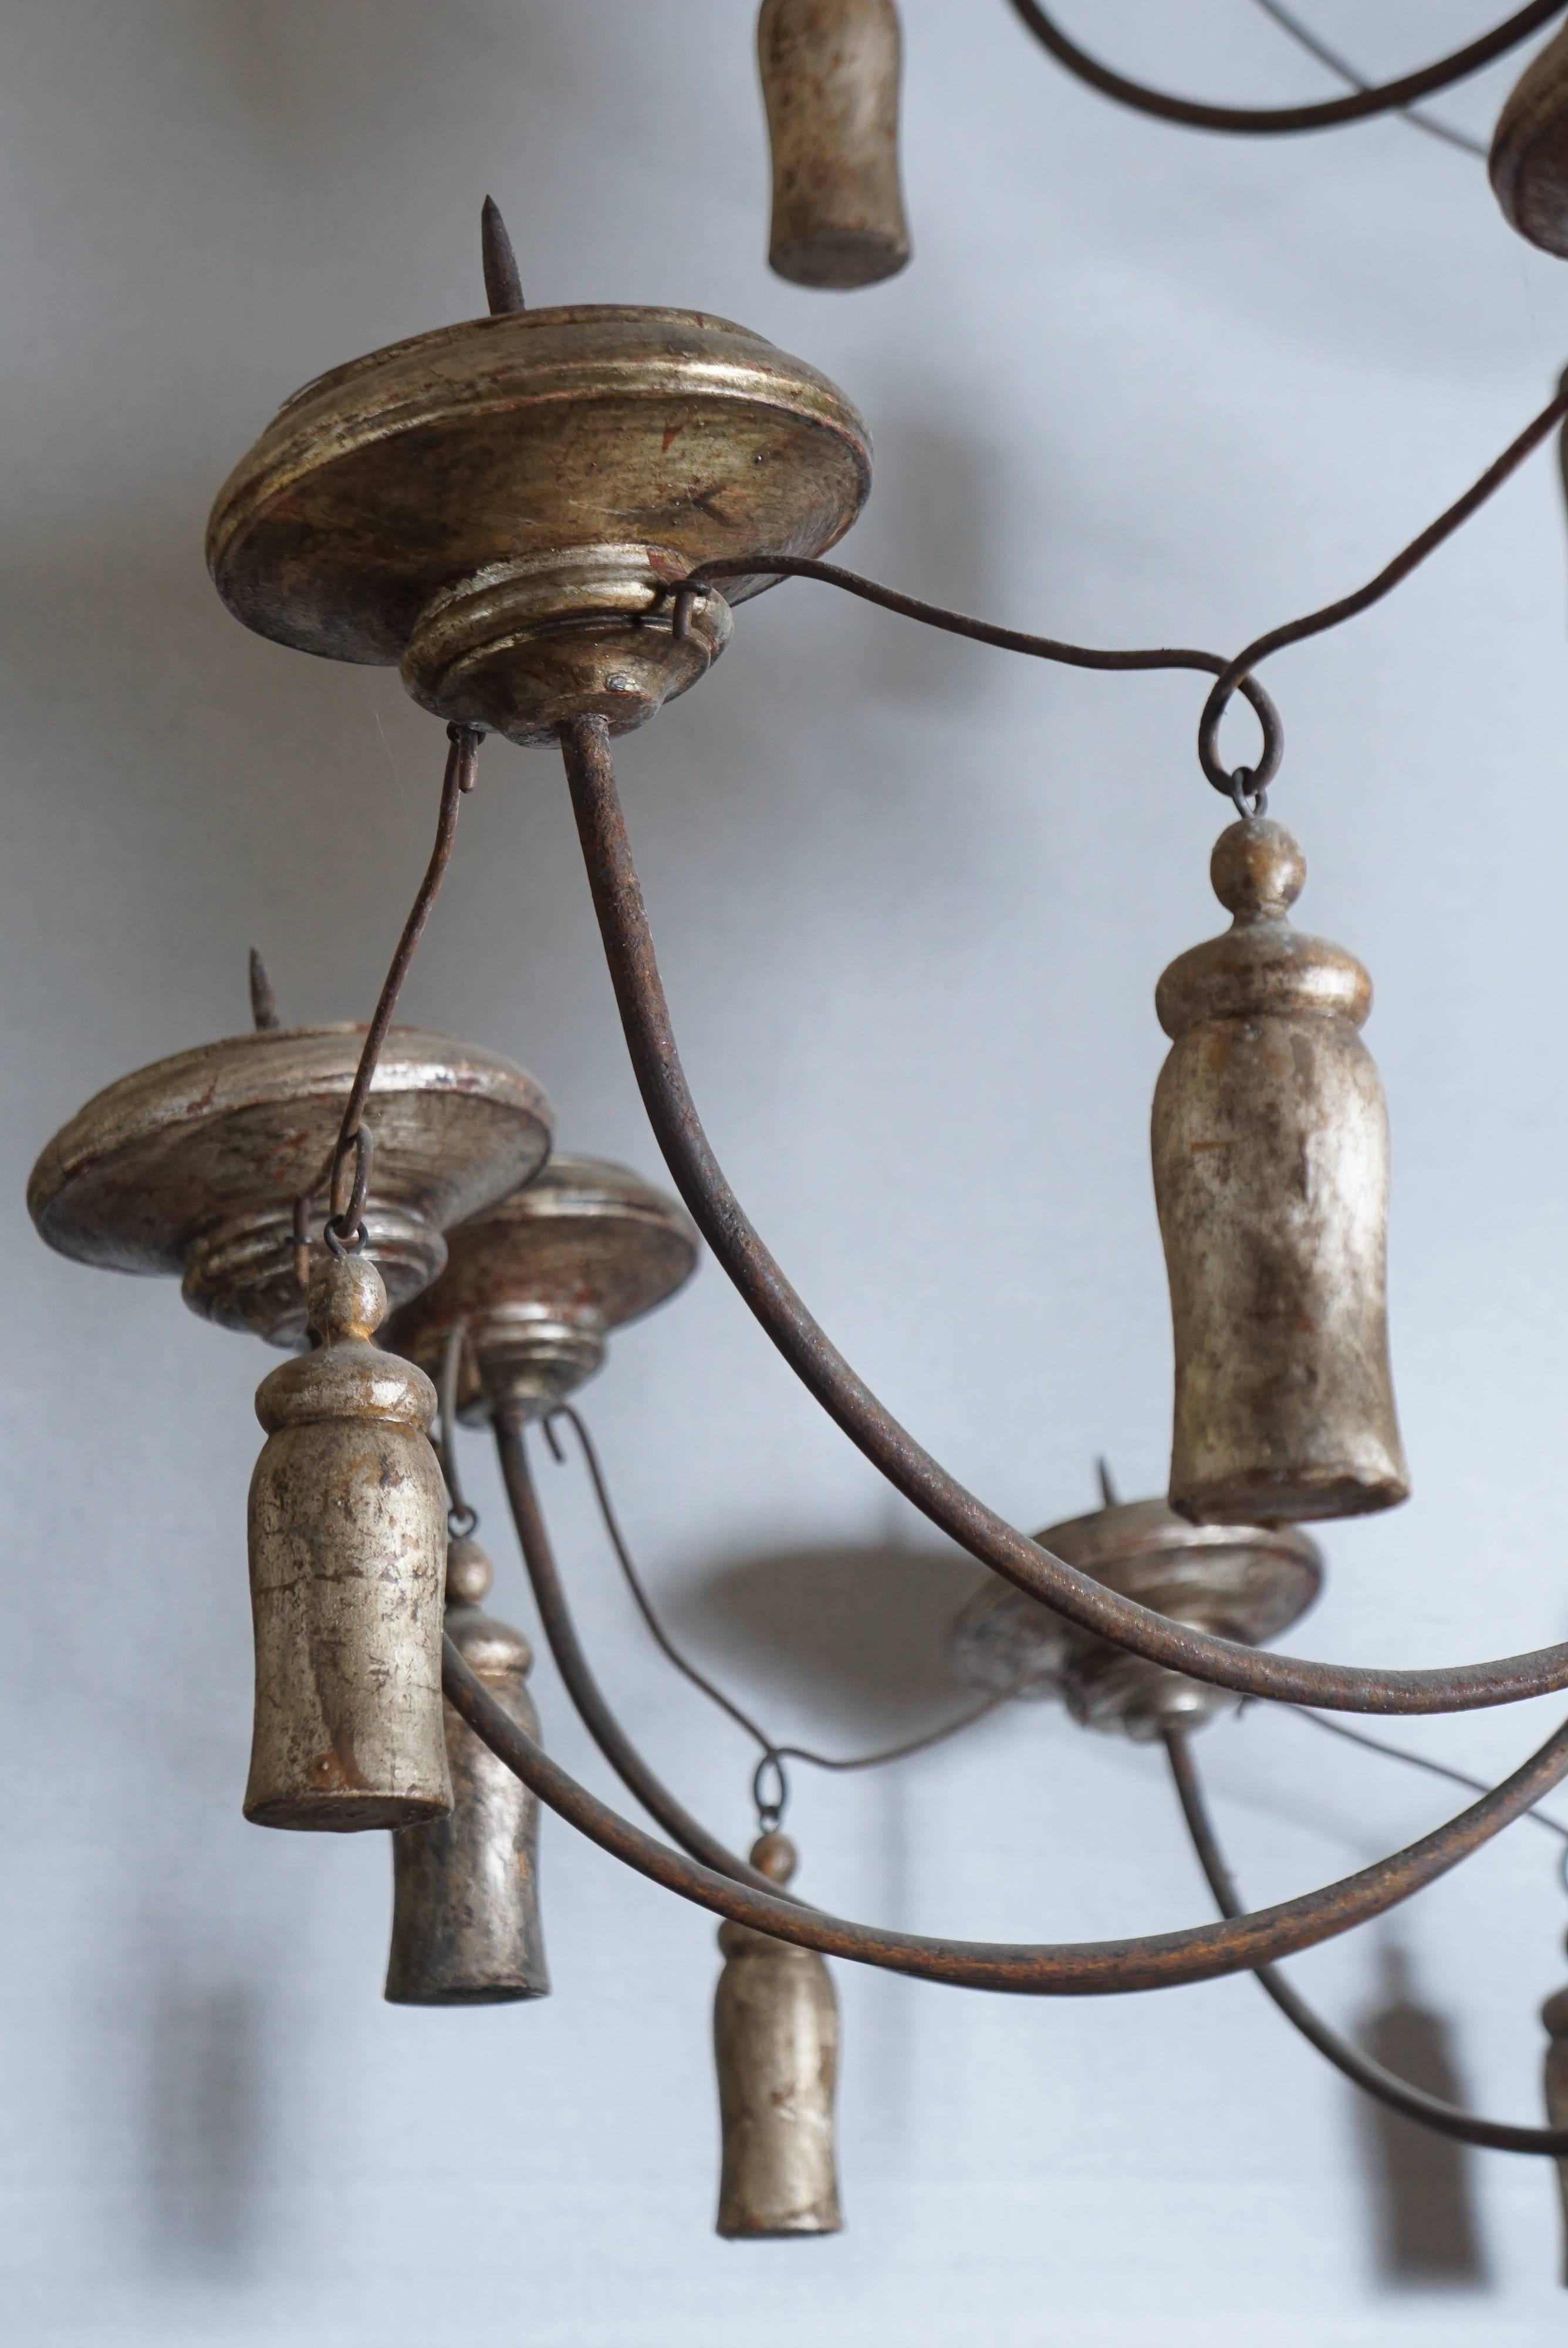 This very large and monumentally scaled pricket light fixture was made in France in the 18th century and over the years it has had some newer parts made and added but is essentially as it was made. The shaft and candle bobeche are carved wood and